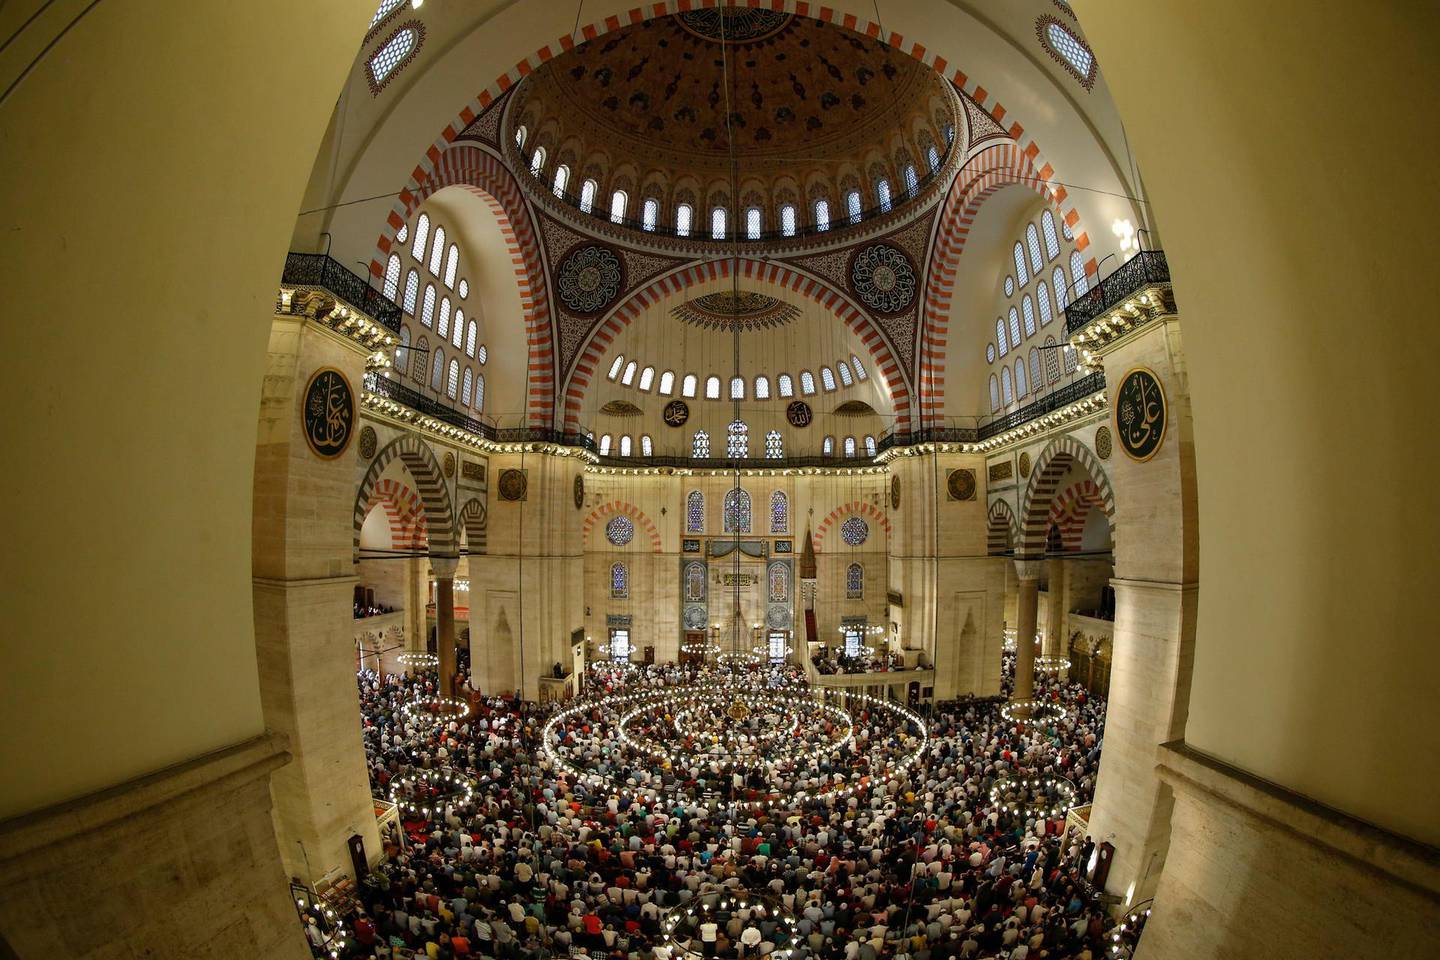 Turkey's Muslims offer prayers during the first day of Eid al-Fitr, which marks the end of the holy fasting month of Ramadan at the the Suleymaniye Mosque in Istanbul, early Friday, June 15, 2018. (AP Photo/Emrah Gurel)